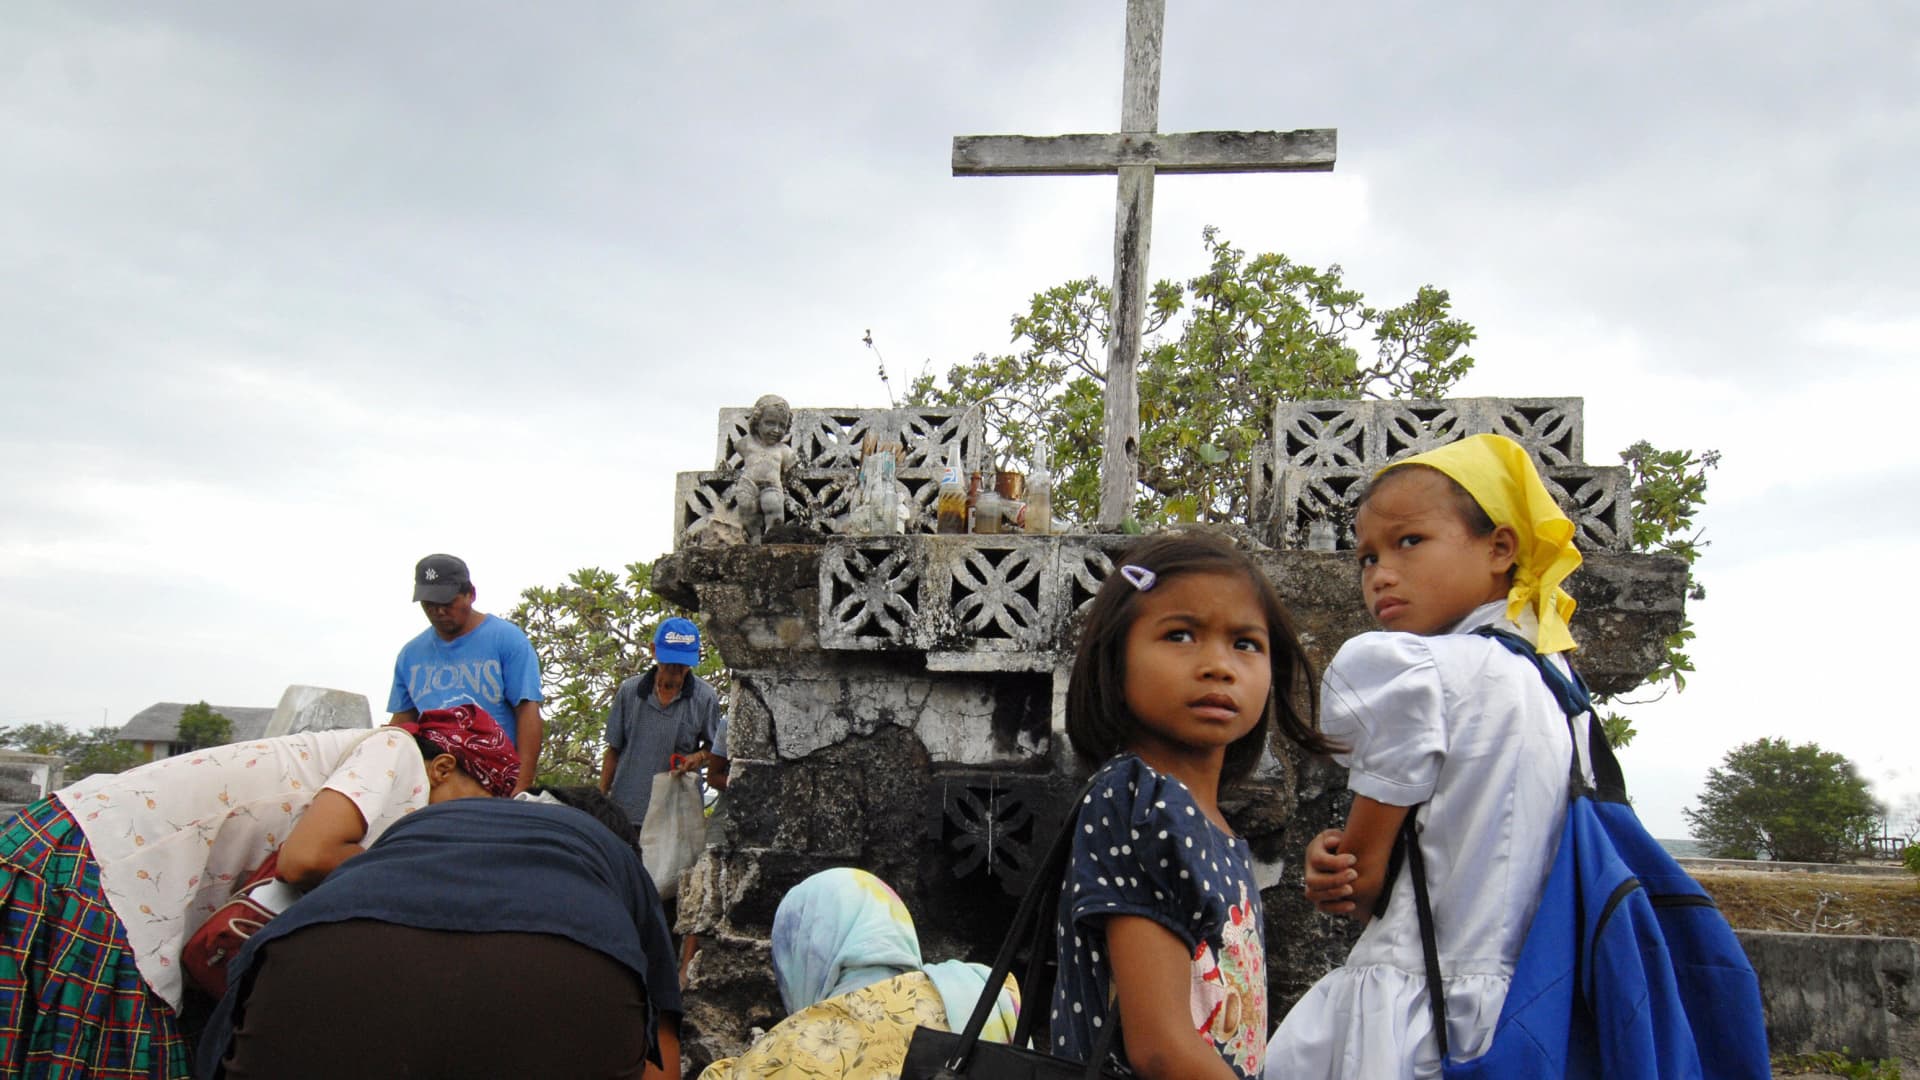 Villagers in Siquijor gather ashes from a cemetery to use in rituals to protect their homes and livestock.